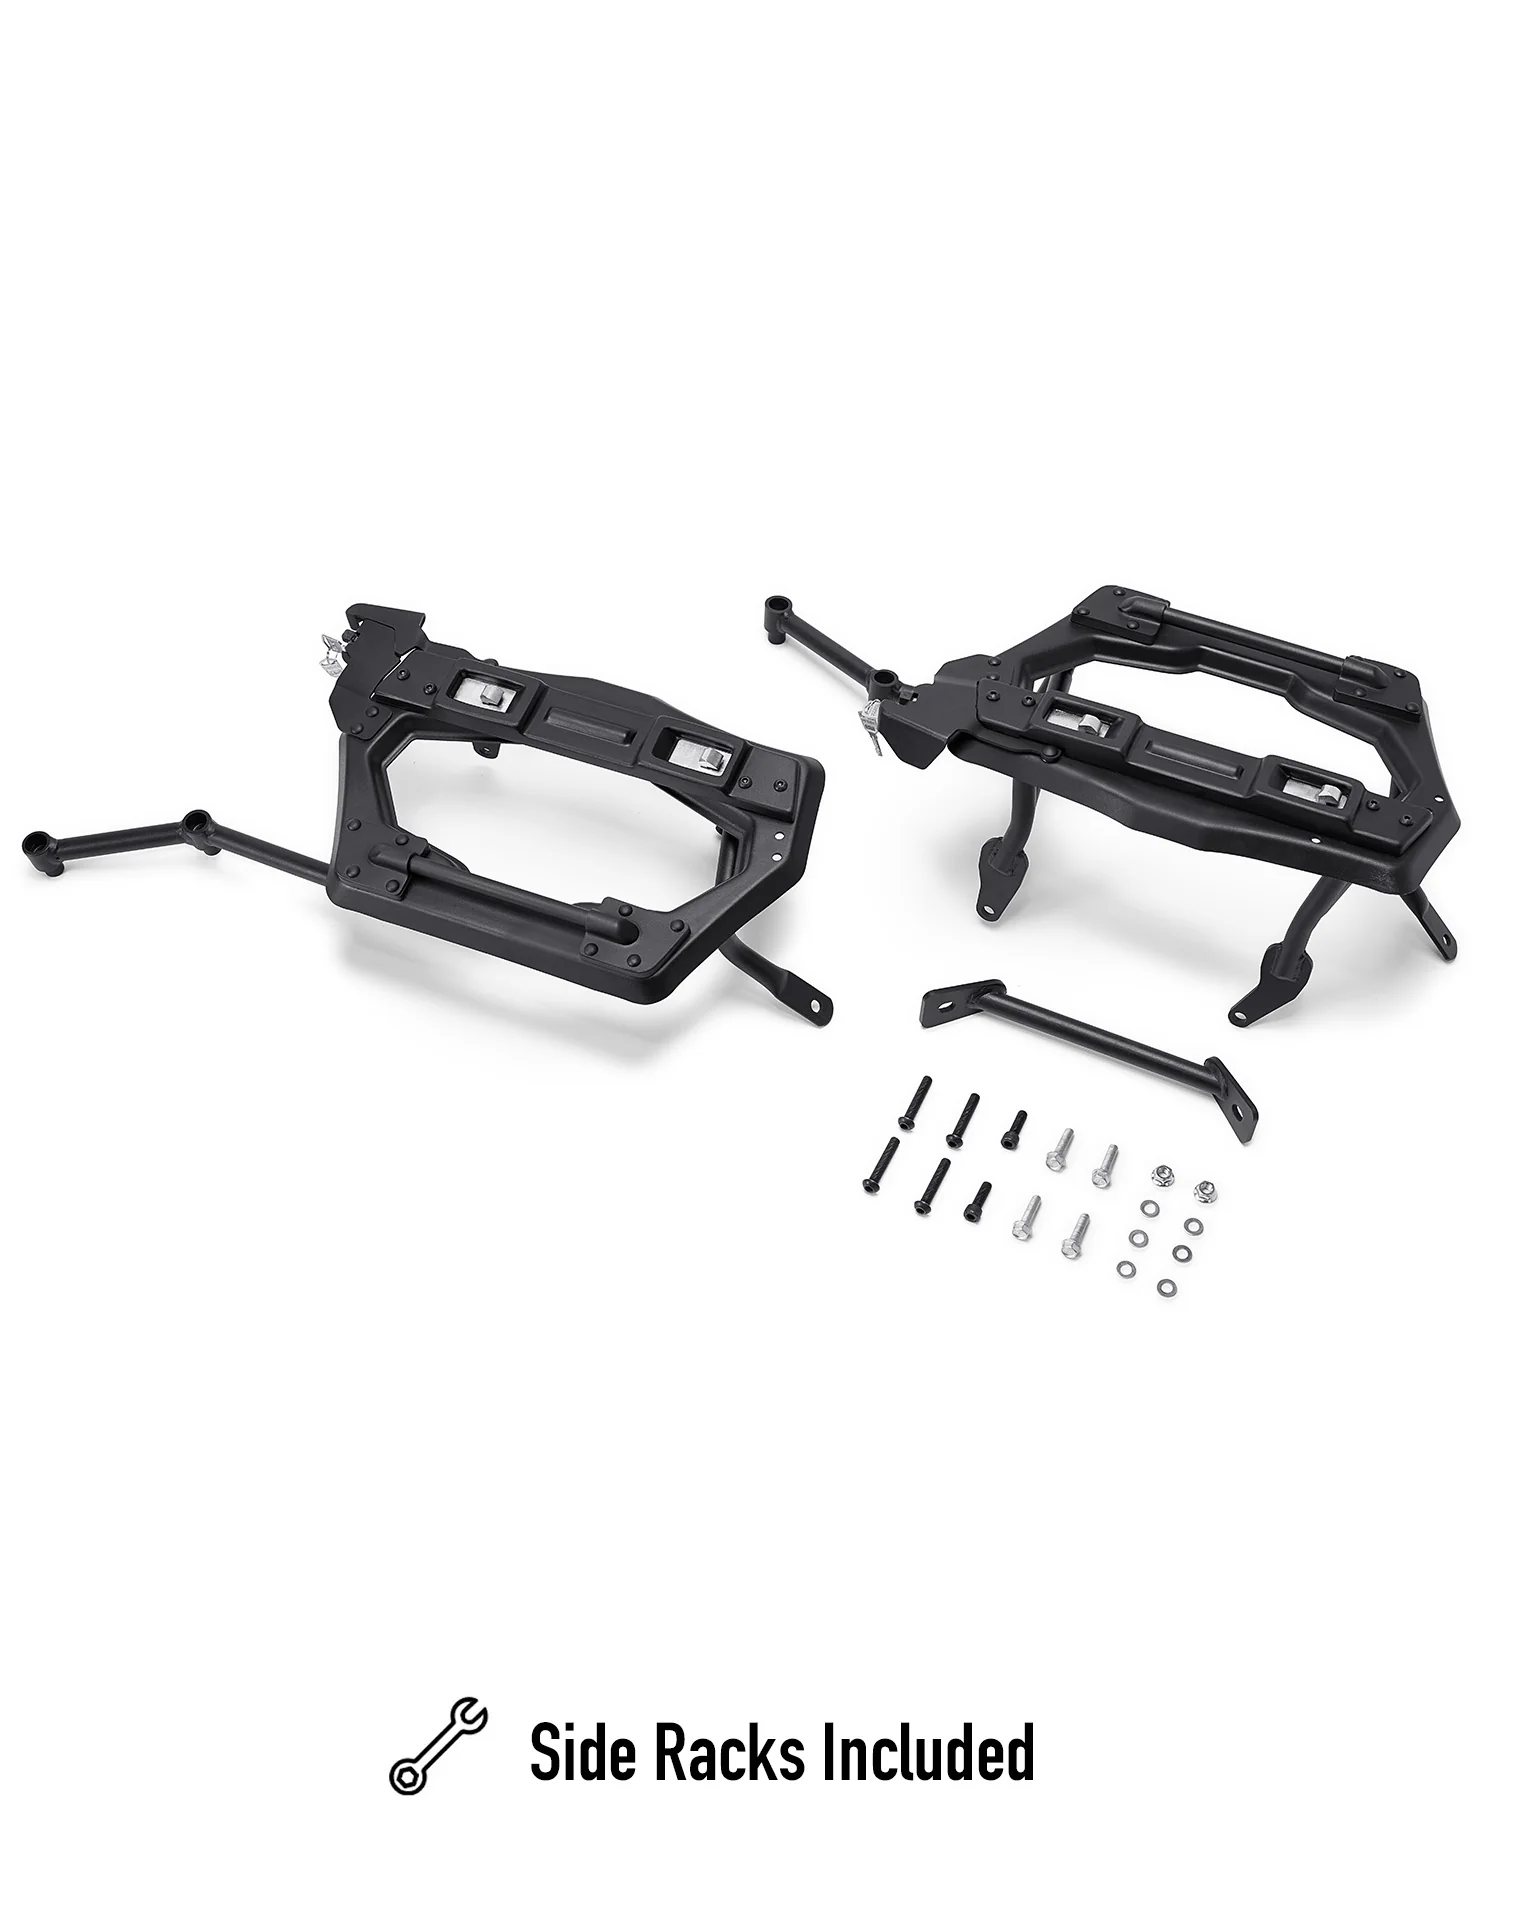 Viking Apex XL Motorcycle Side Cases for Harley Pan America RA1250/S Black Hardware Included